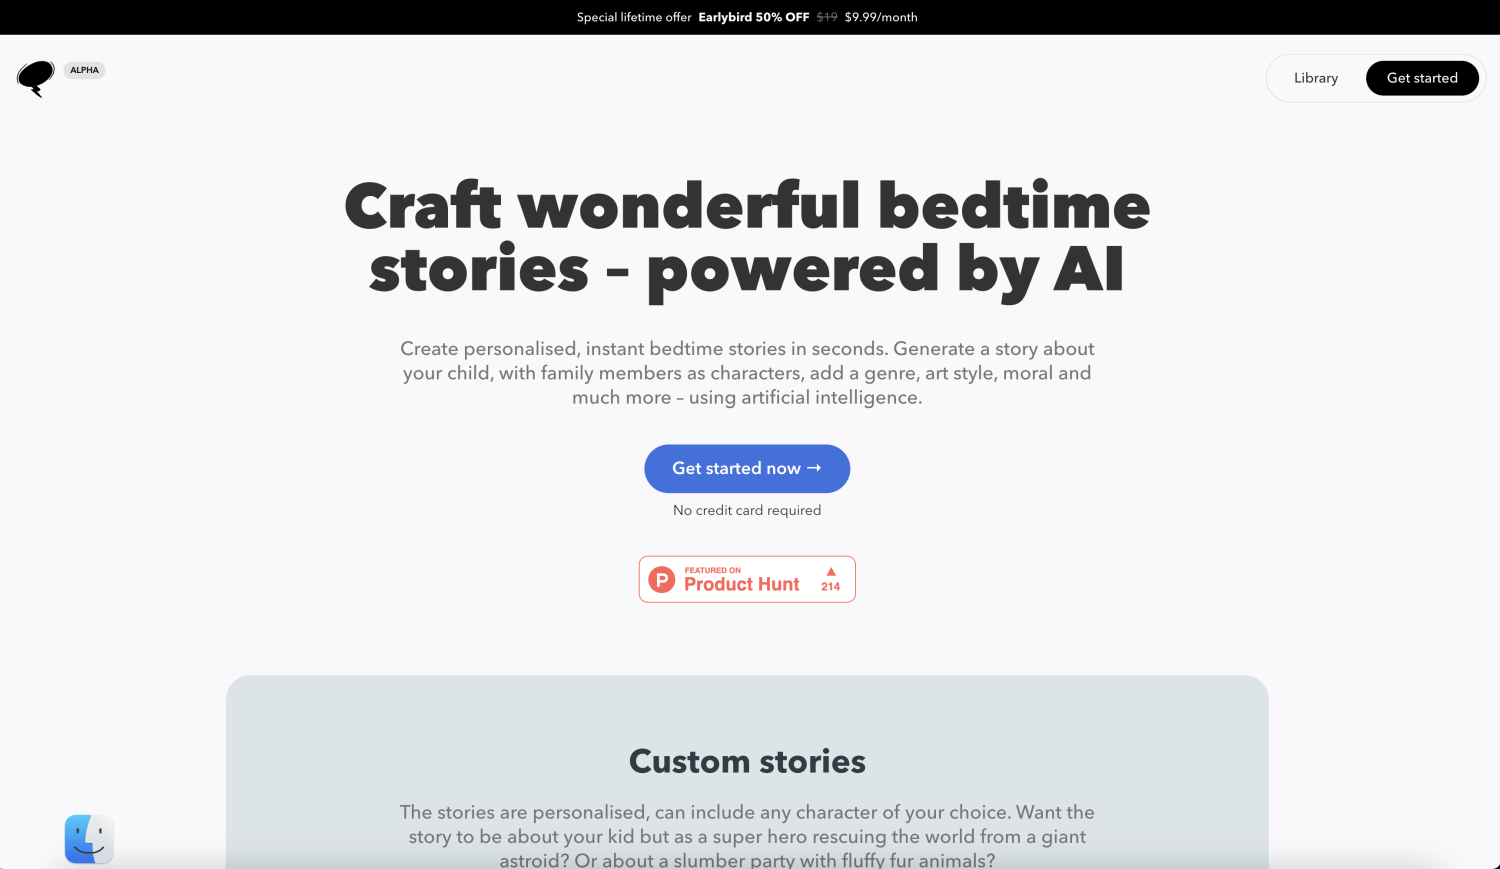 BedtimeStory.AI: Easy Way to Find New and Engaging Bedtime Stories